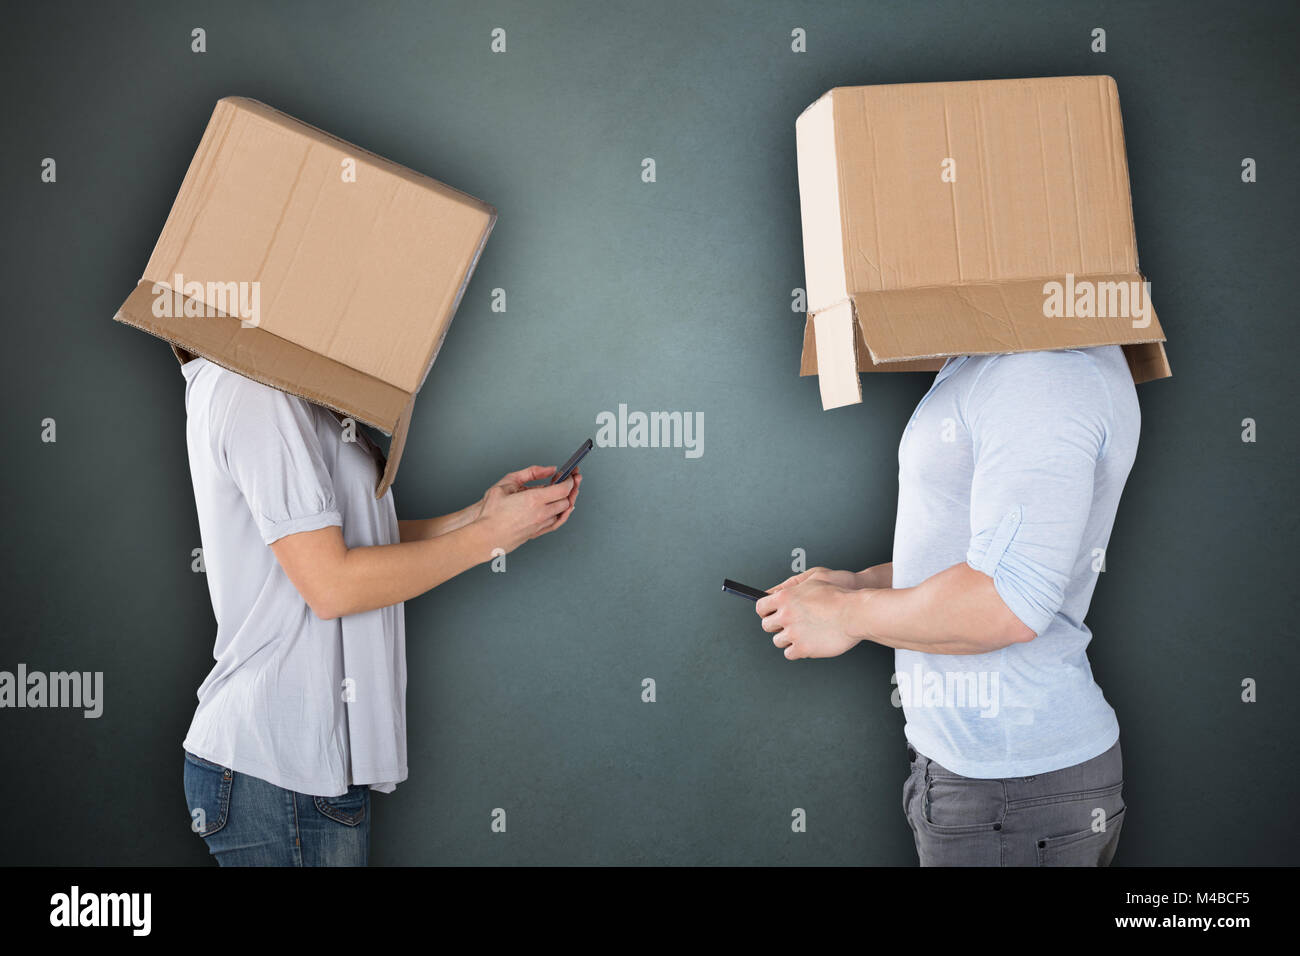 Couple Covering Their Heads With Cardboard box Using Cellphone Stock Photo